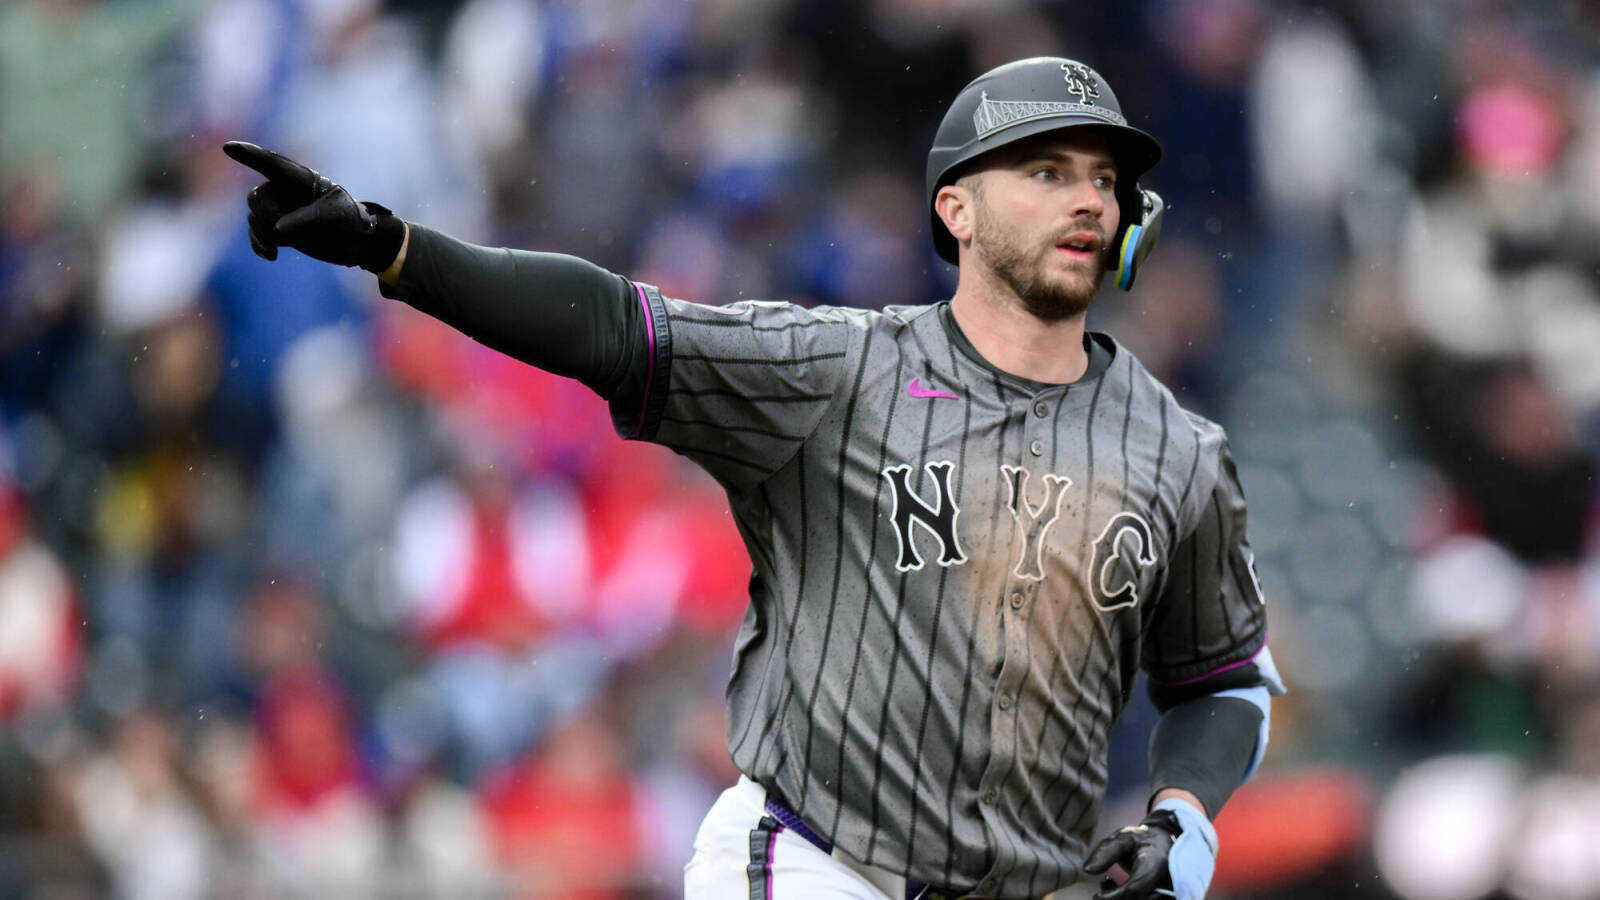 Mets' Pete Alonso discusses if struggles are related to pending free agency